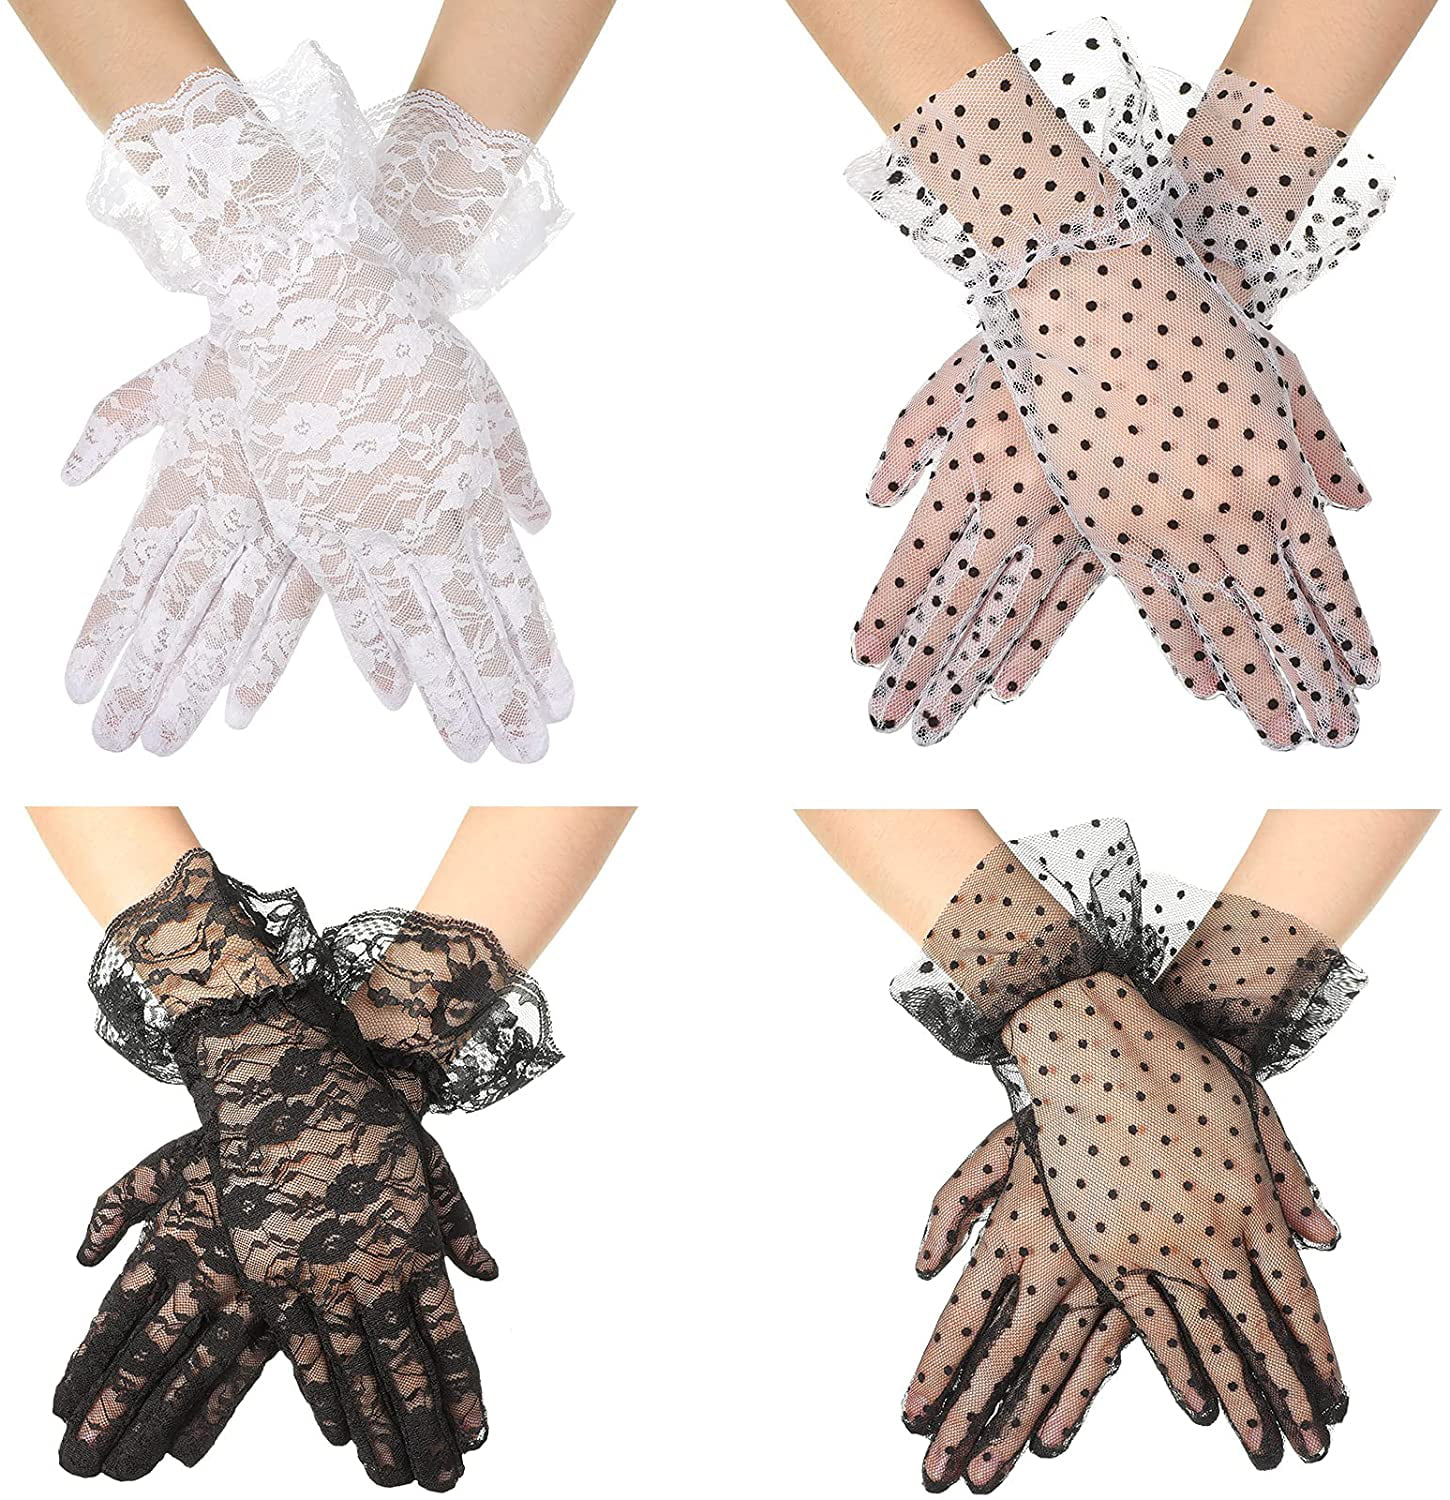 White Lace Wedding Bridal Evening Party Costume Accessory Elegant Gloves Mittens